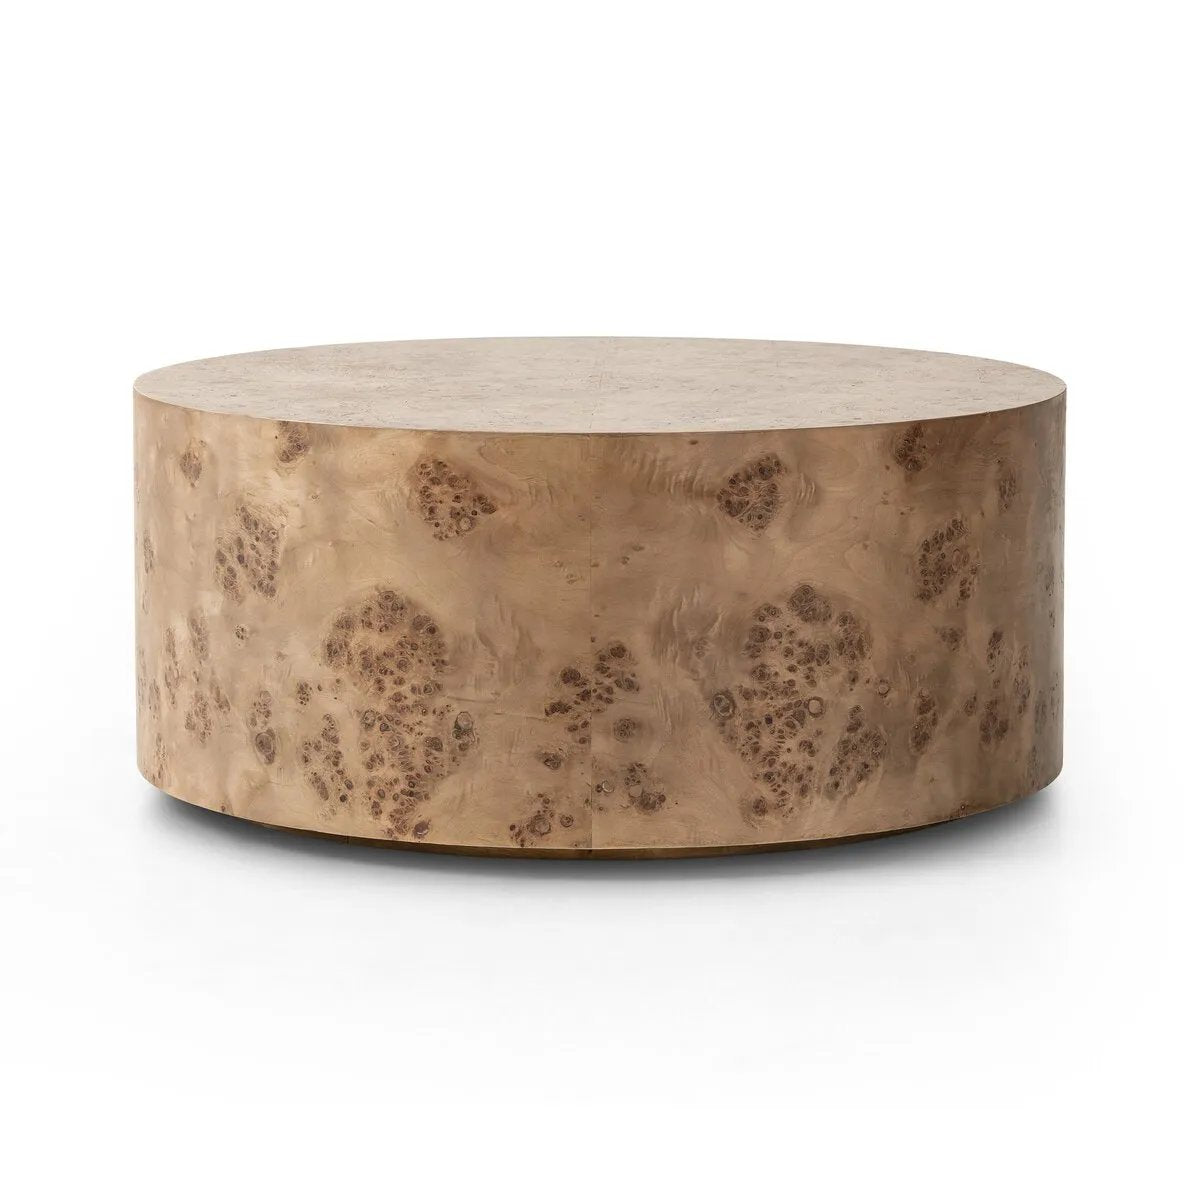 Simple drum shaping showcases the natural artistry of the richly grained caramel burl veneer. Its compact size is ideal for smaller spaces.Collection: Hughe Amethyst Home provides interior design, new home construction design consulting, vintage area rugs, and lighting in the Nashville metro area.